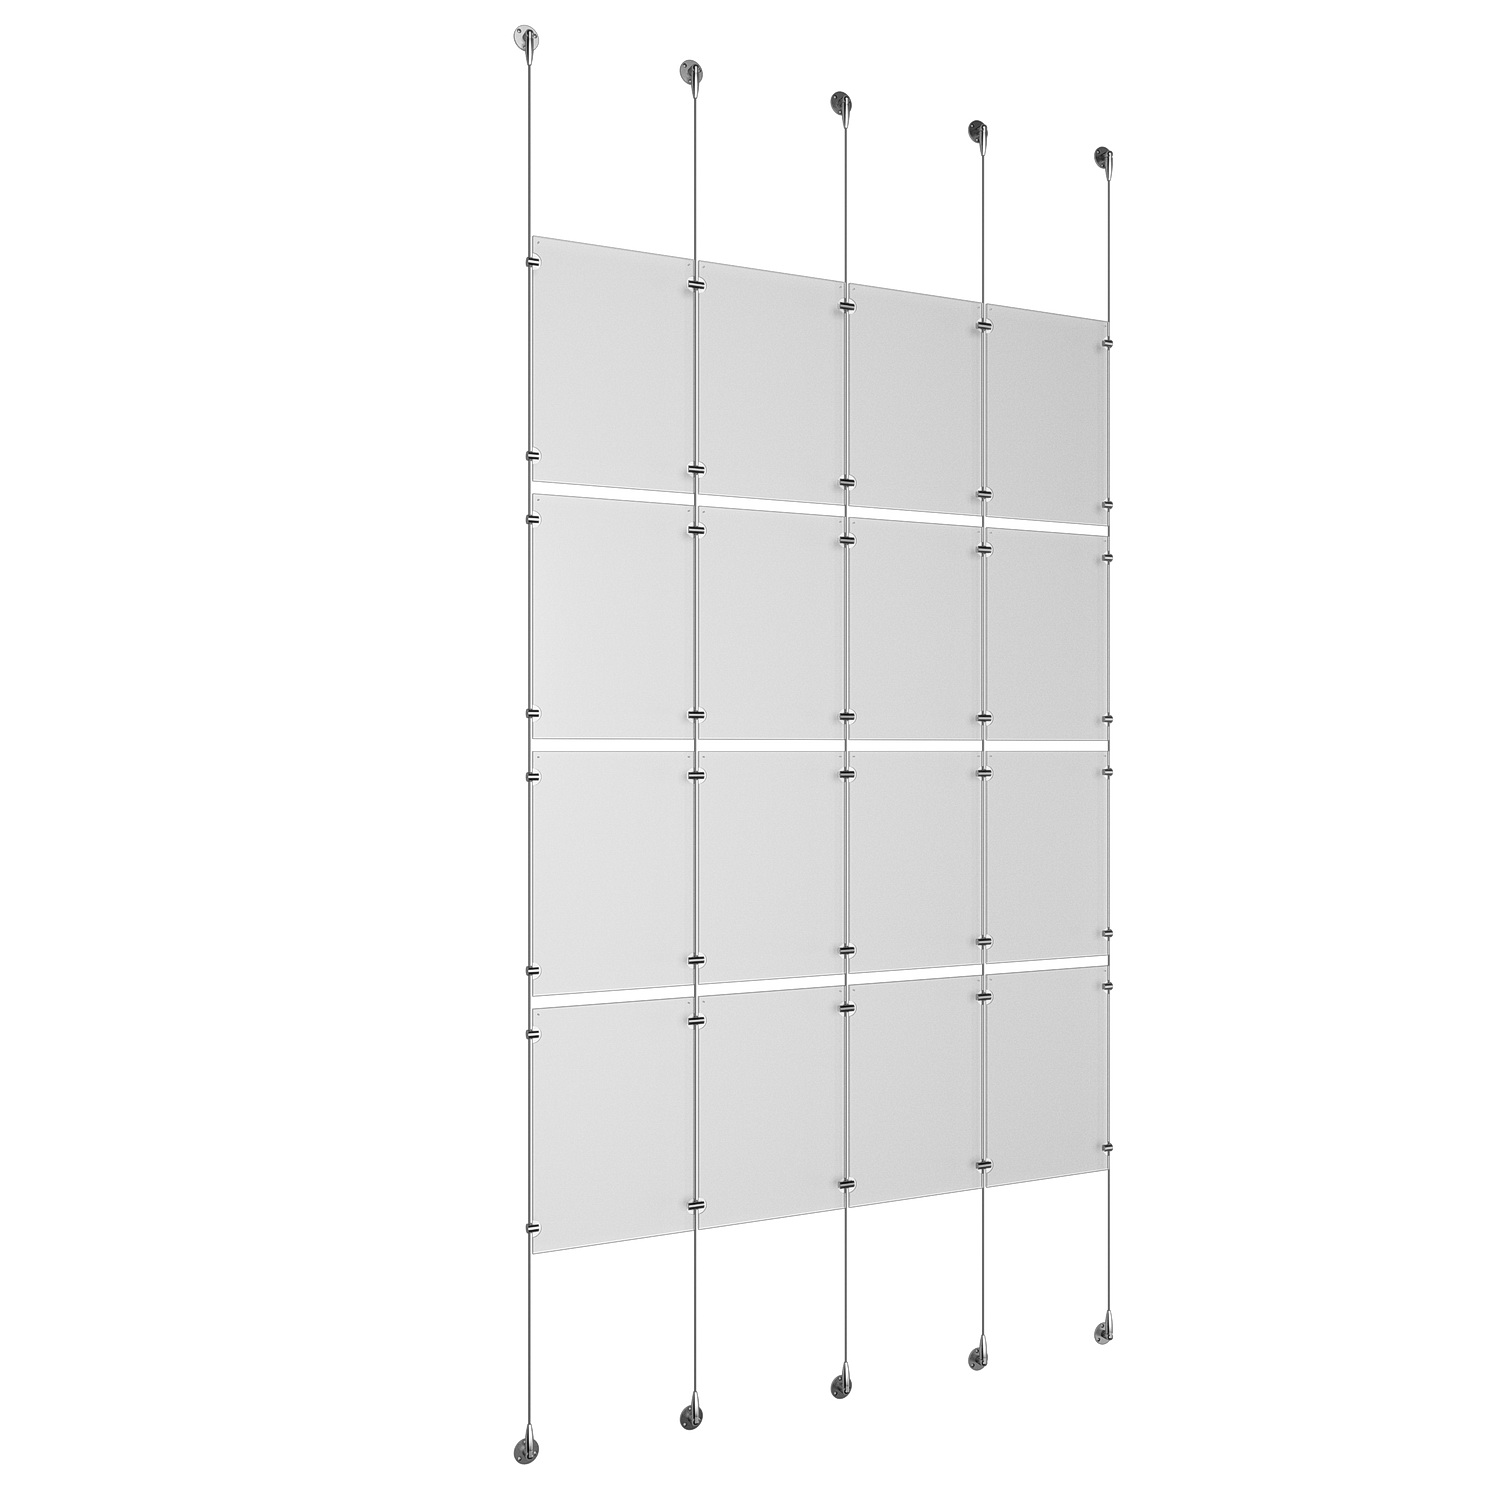 (16) 11'' Width x 17'' Height Clear Acrylic Frame & (5) Stainless Steel Satin Brushed Adjustable Angle Signature 1/8'' Cable Systems with (16) Single-Sided Panel Grippers (24) Double-Sided Panel Grippers